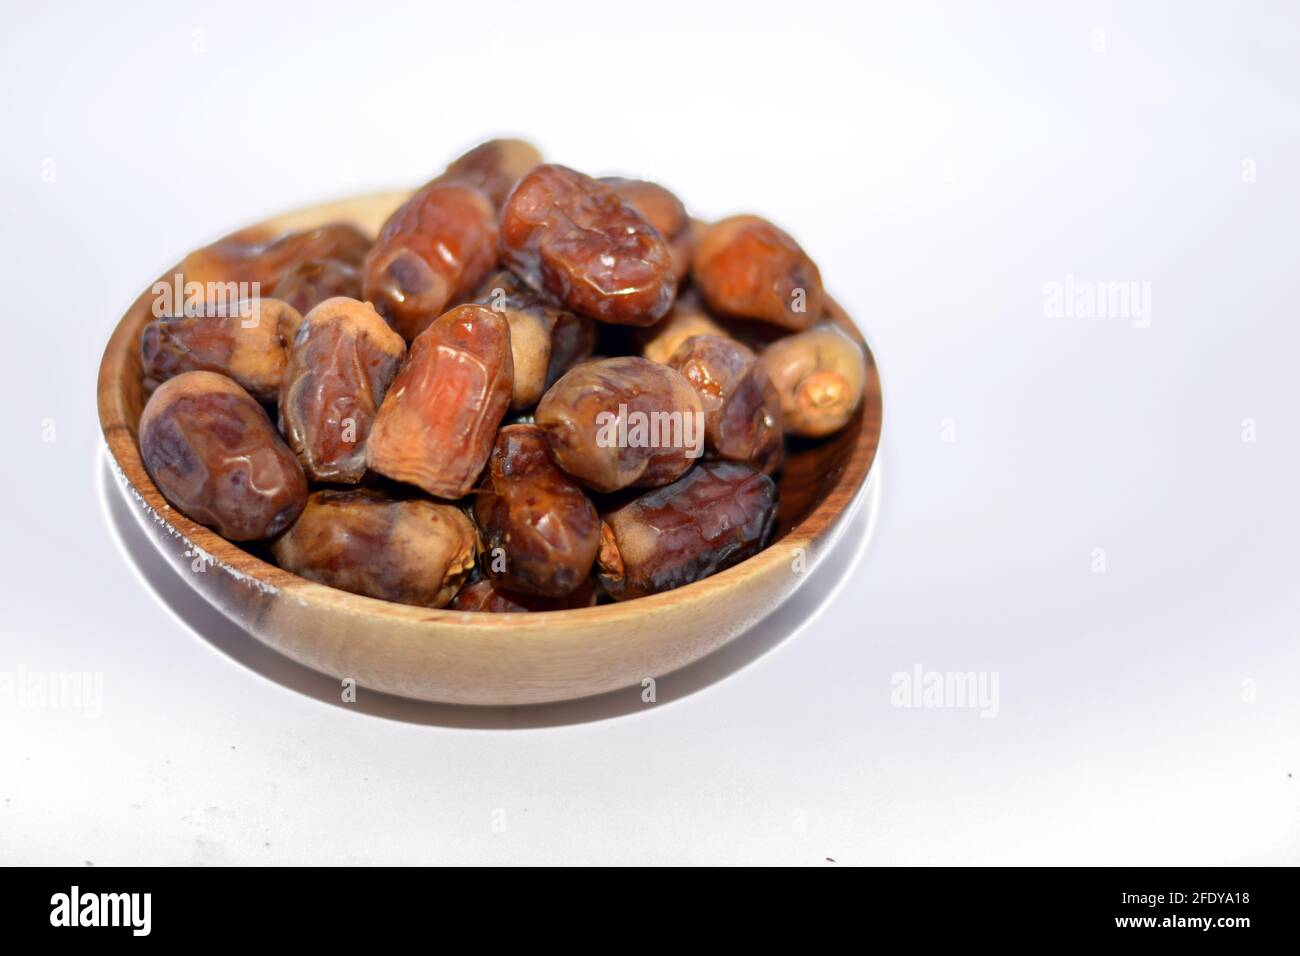 Dried dates fruit in a wooden bowl isolated on a white background, dried dates used in breakfast in Ramadan month as the first iftar meal Stock Photo